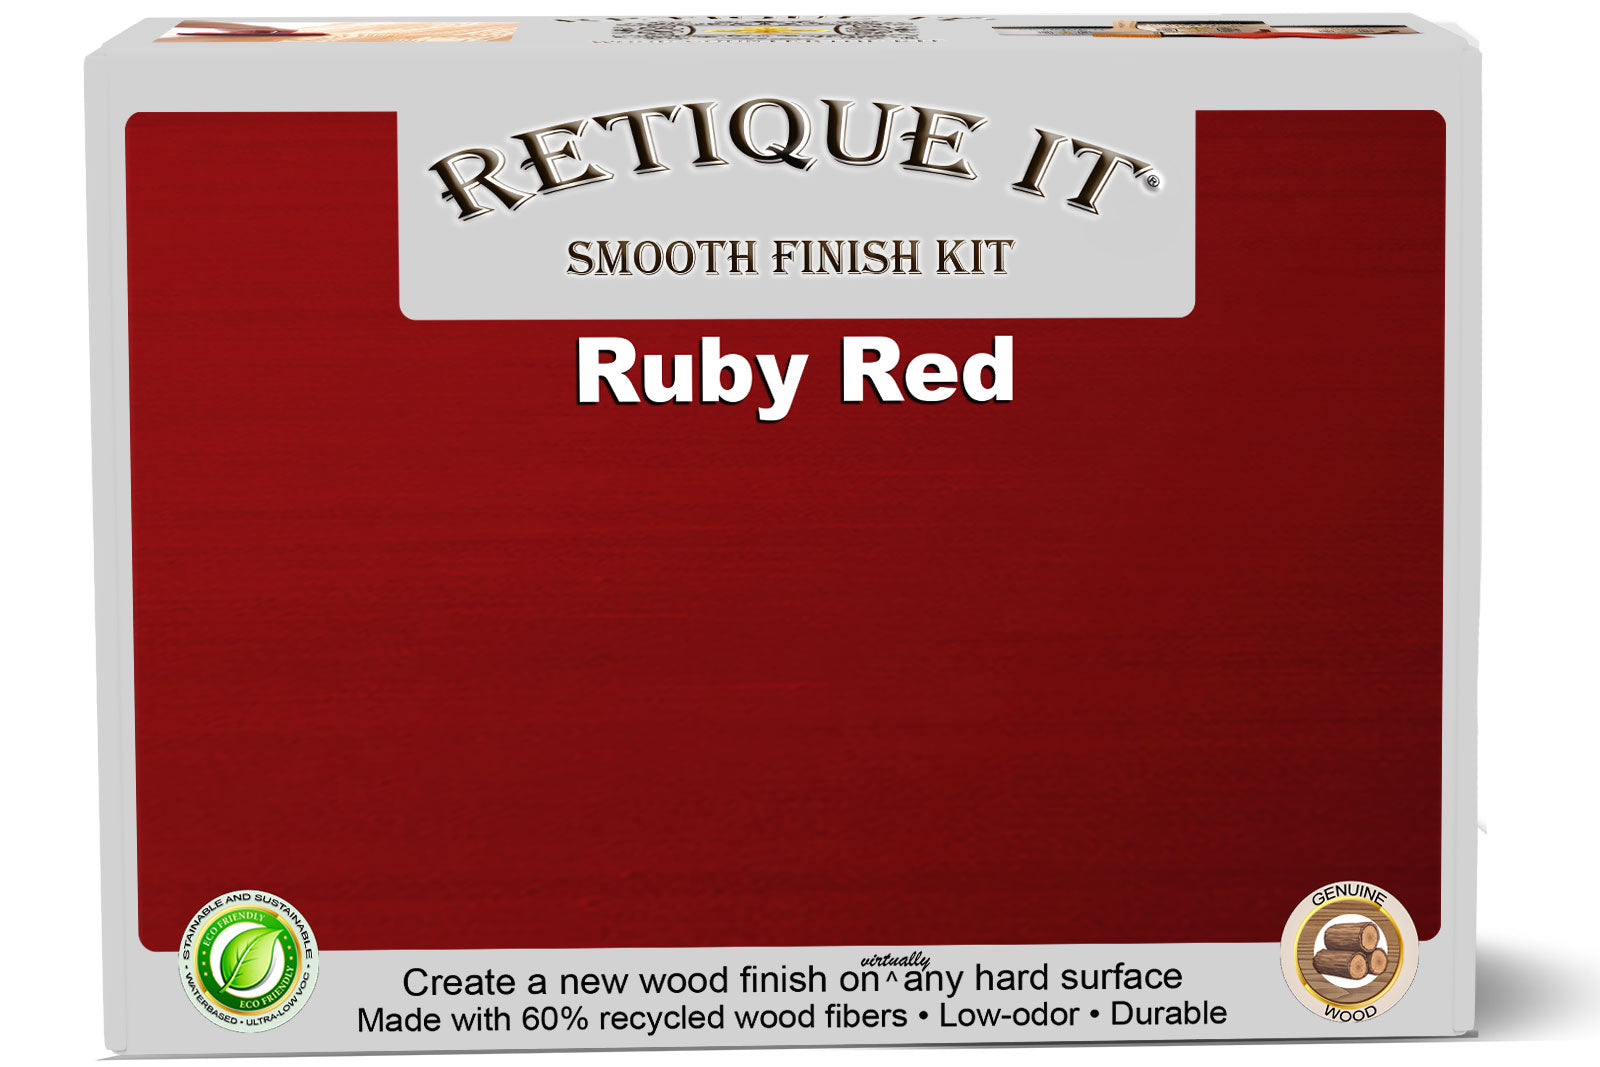 Smooth Finish Kit - Ruby Red